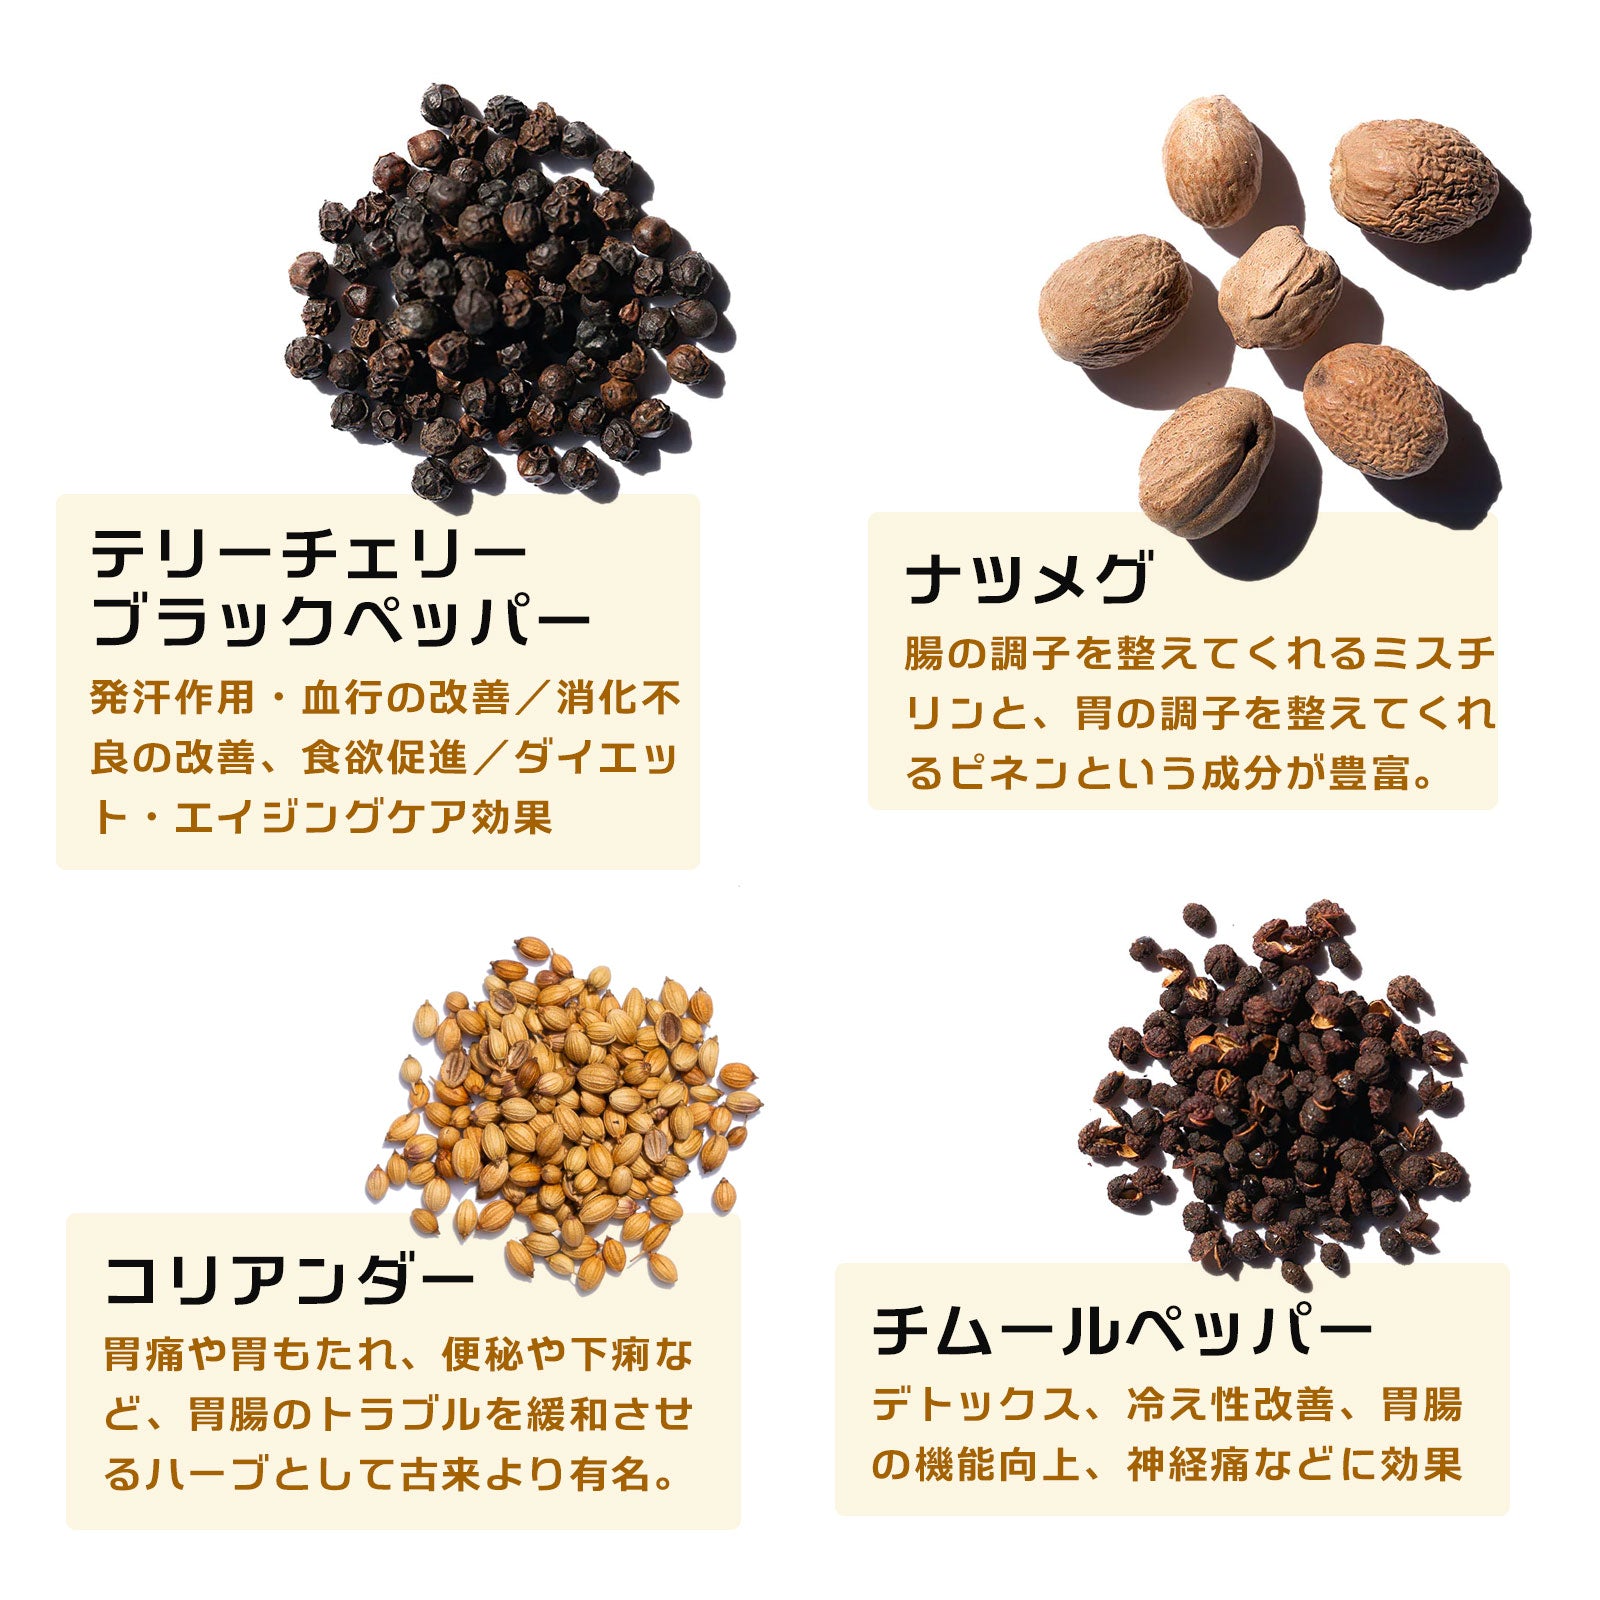 INSPICE CHAI SPICE PACK「チャイ スパイスパック」 2パック入り｜商品